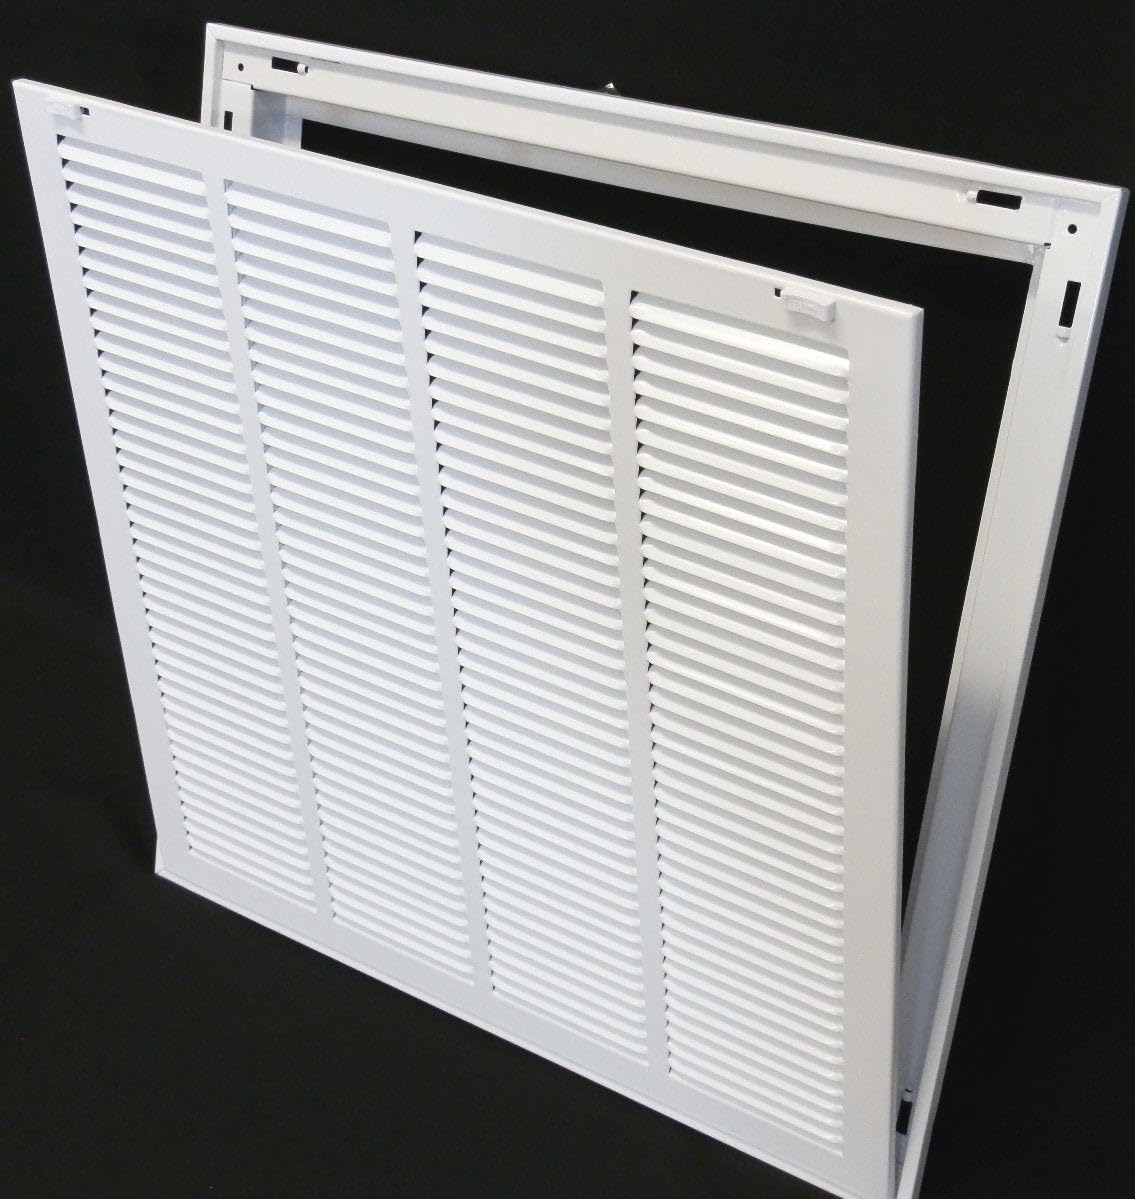 24&quot; X 16&quot; Steel Return Air Filter Grille for 1&quot; Filter - Removable Frame - * Filter Included * [Outer Dimensions: 26 5/8&quot; X 18 5/8&quot;]